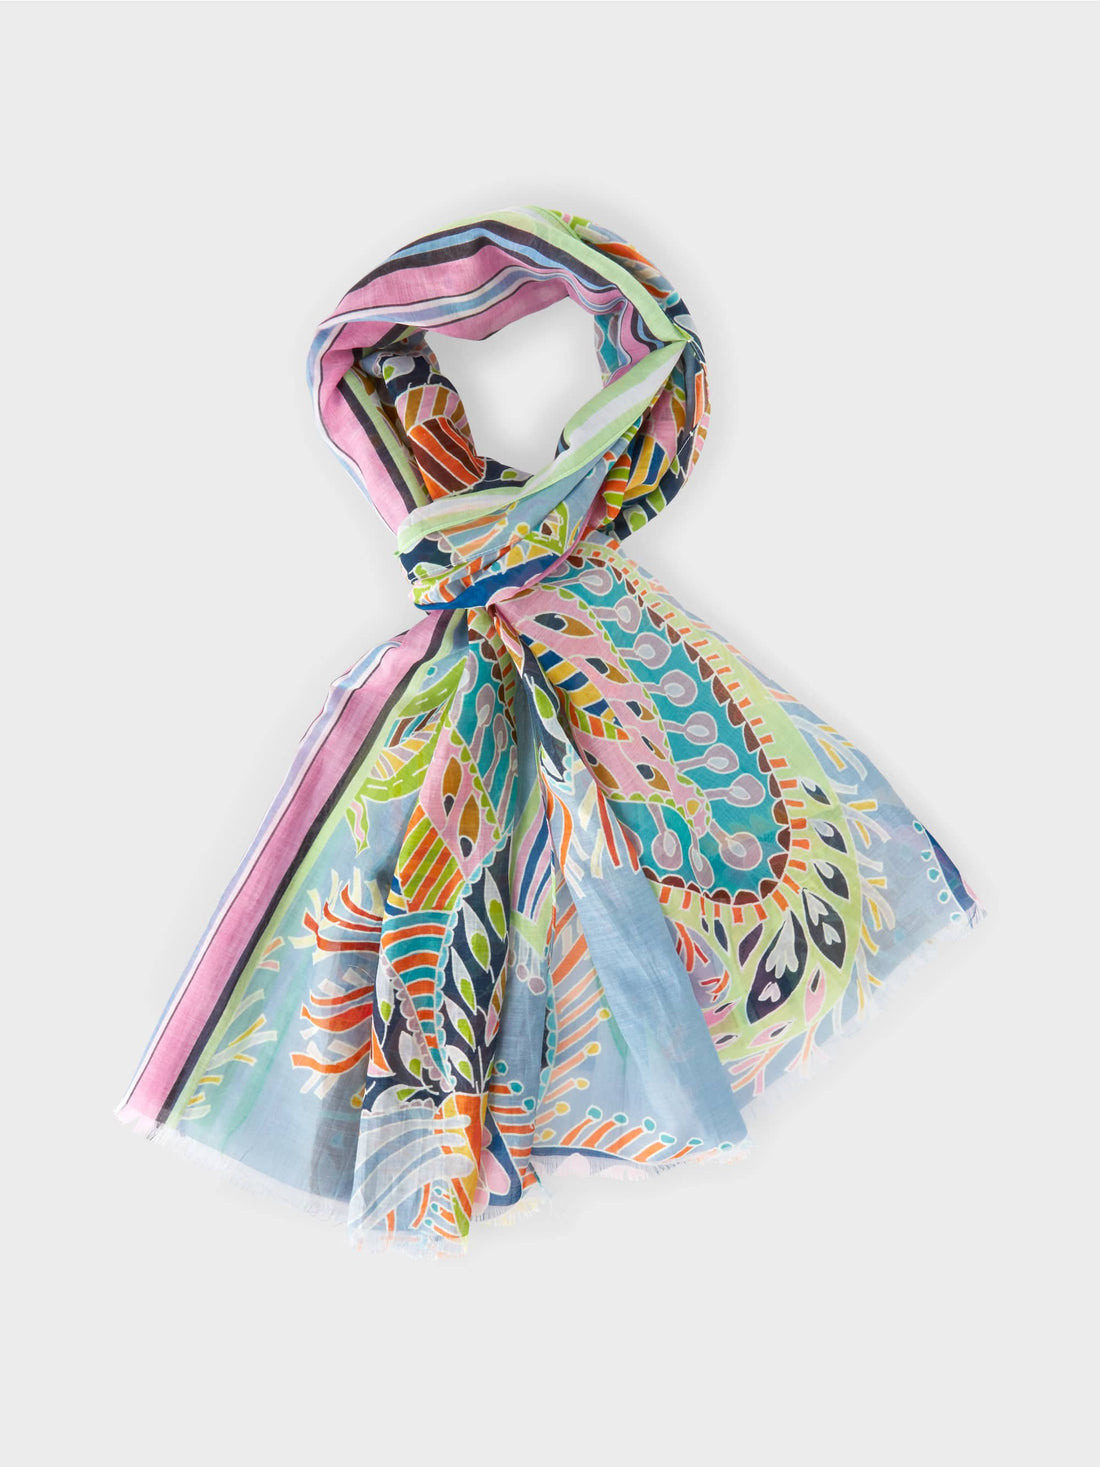 Scarf In An Oriental Inspired Print_Wc B4.07 Z32_321_01